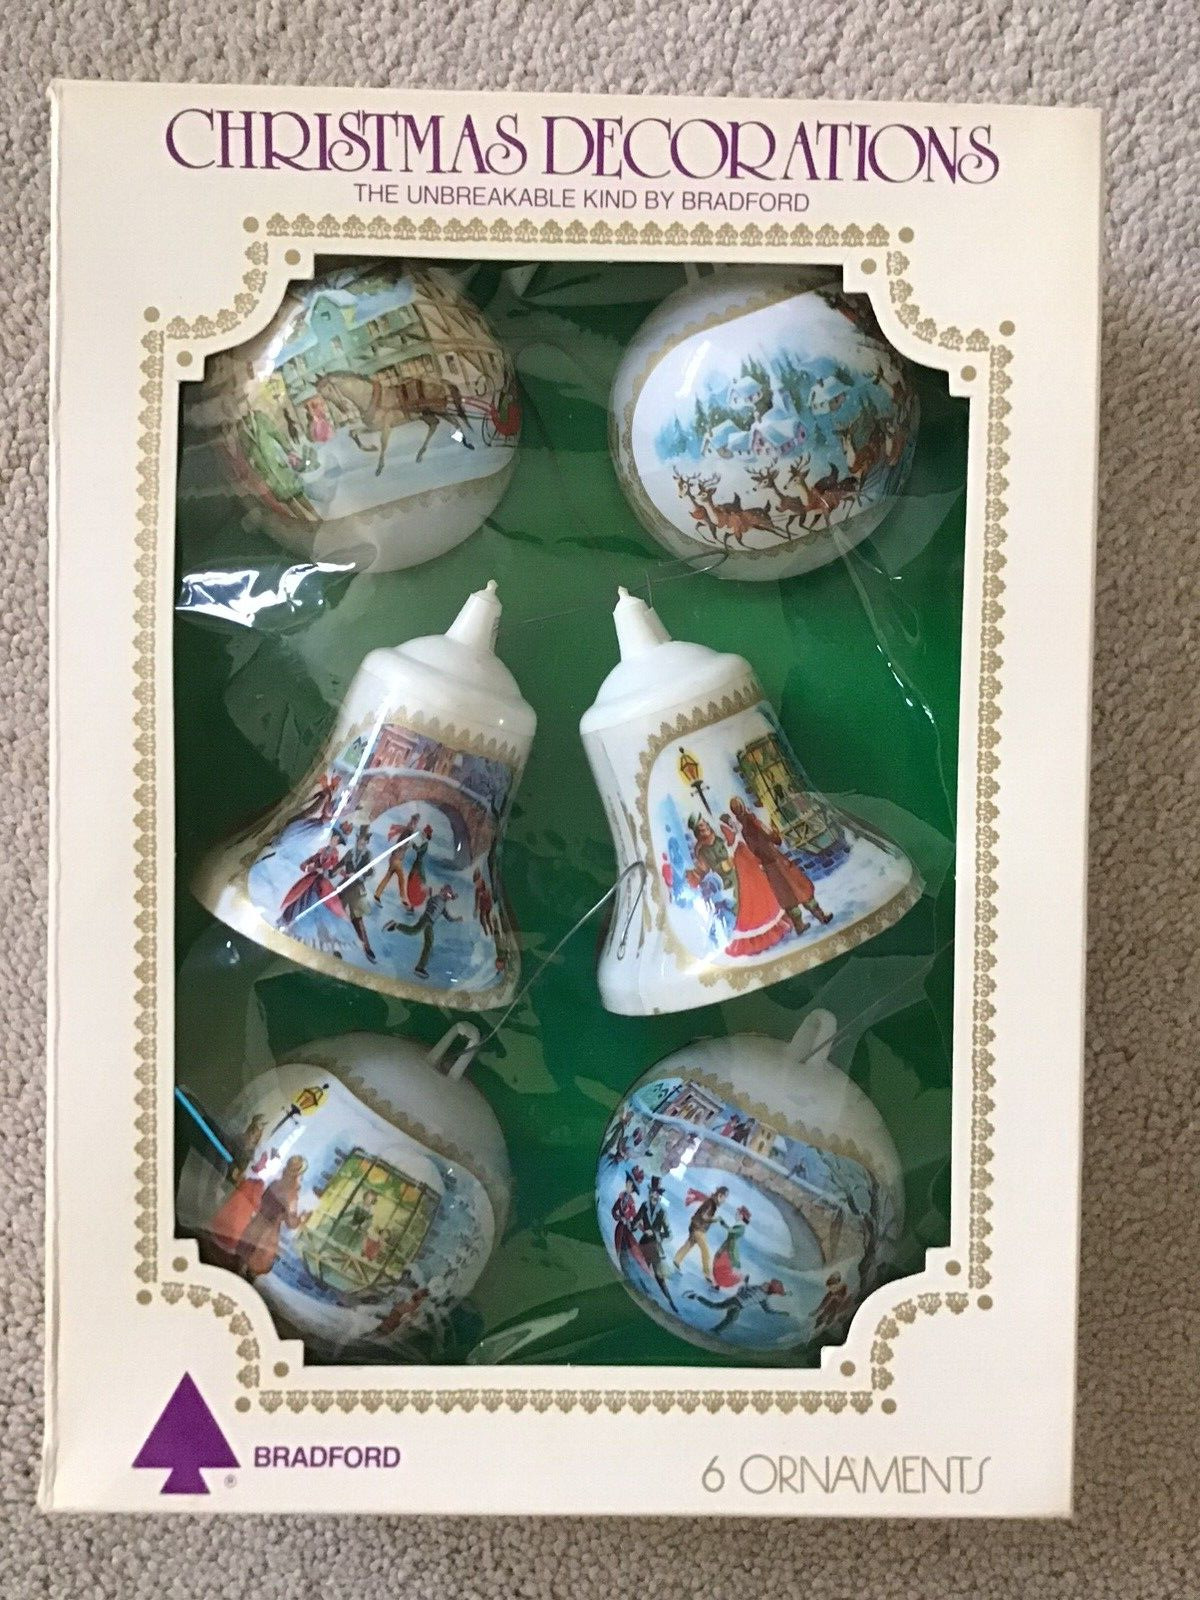 Bradford Christmas Decorations 6 Ornaments The Unbreakable Kind in Original Box